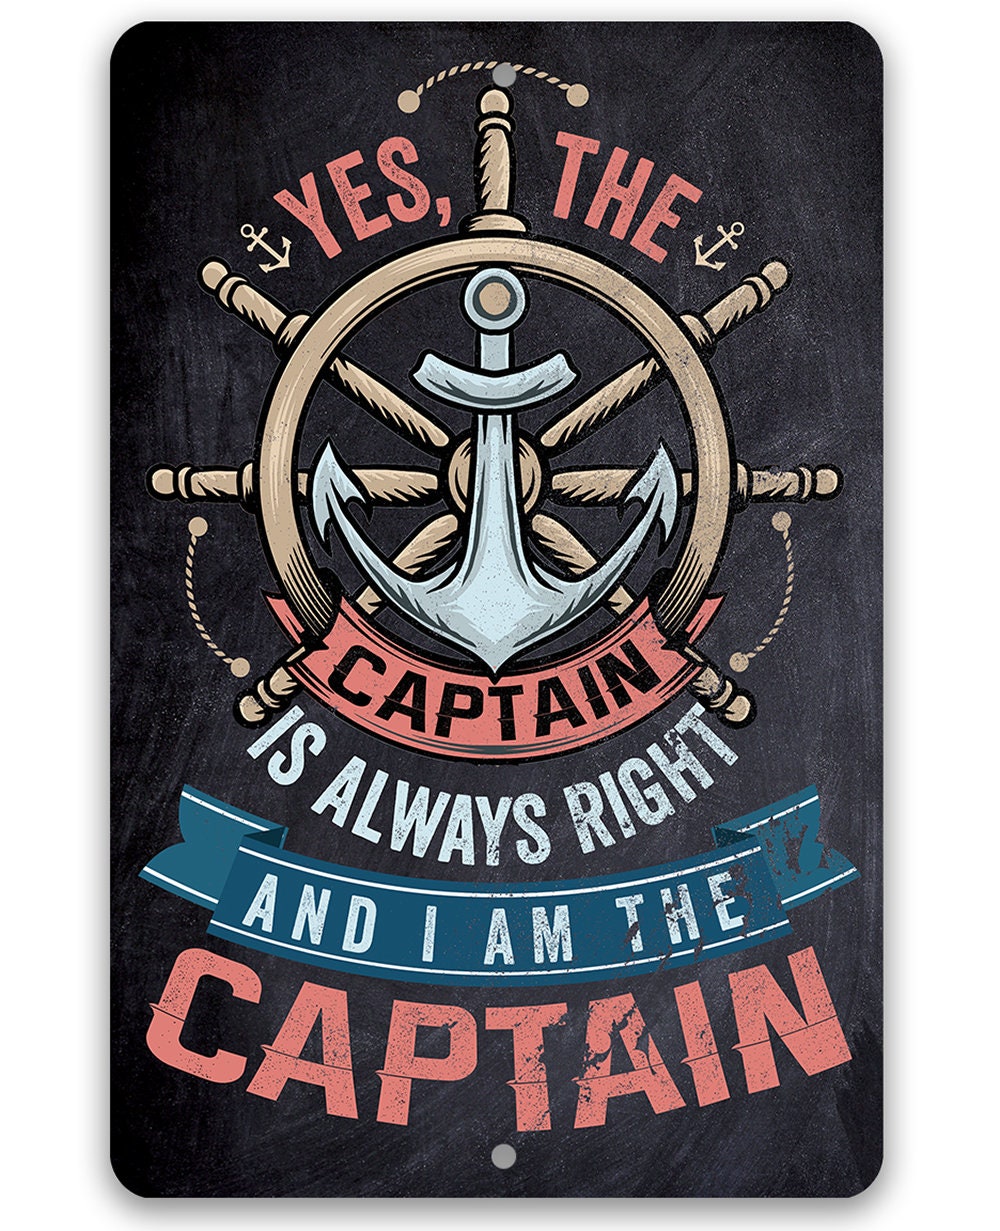 Yes The Captain Is Always Right And I Am The Captain - Metal Sign Metal Sign Lone Star Art 